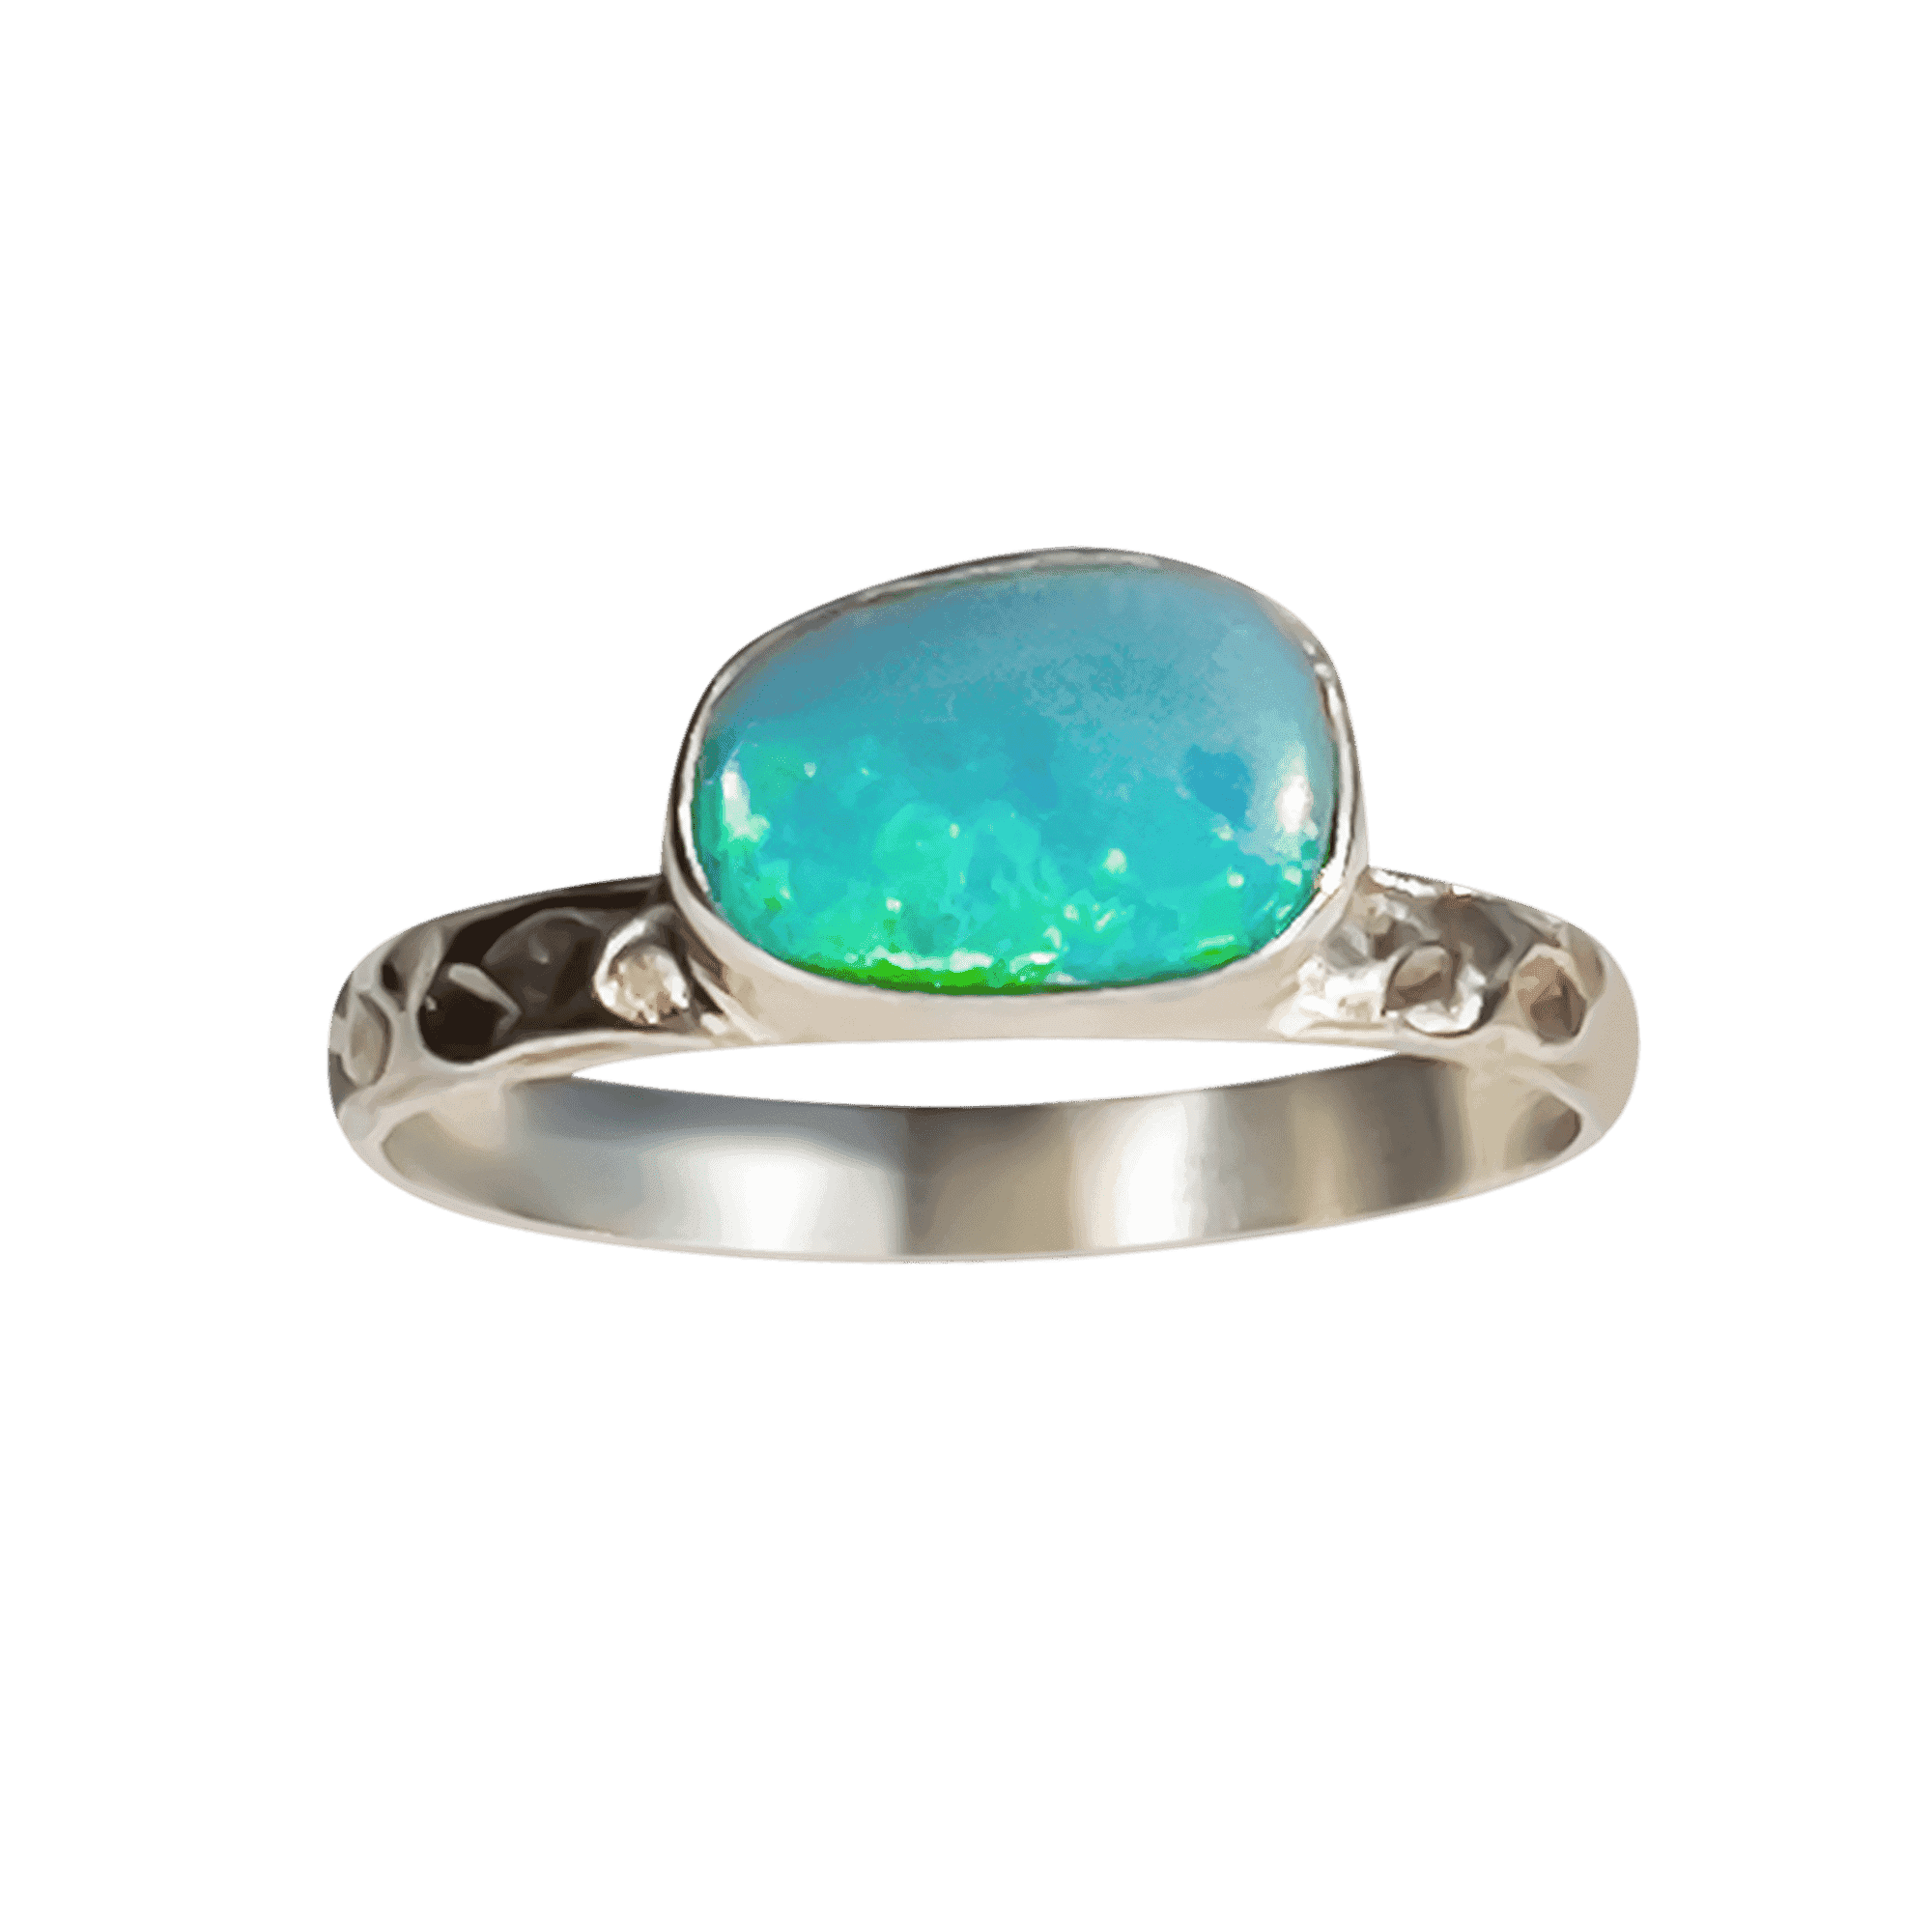 handmade symbolic spiritual jewellery sustainable fashion one of the kind crystal opal ring